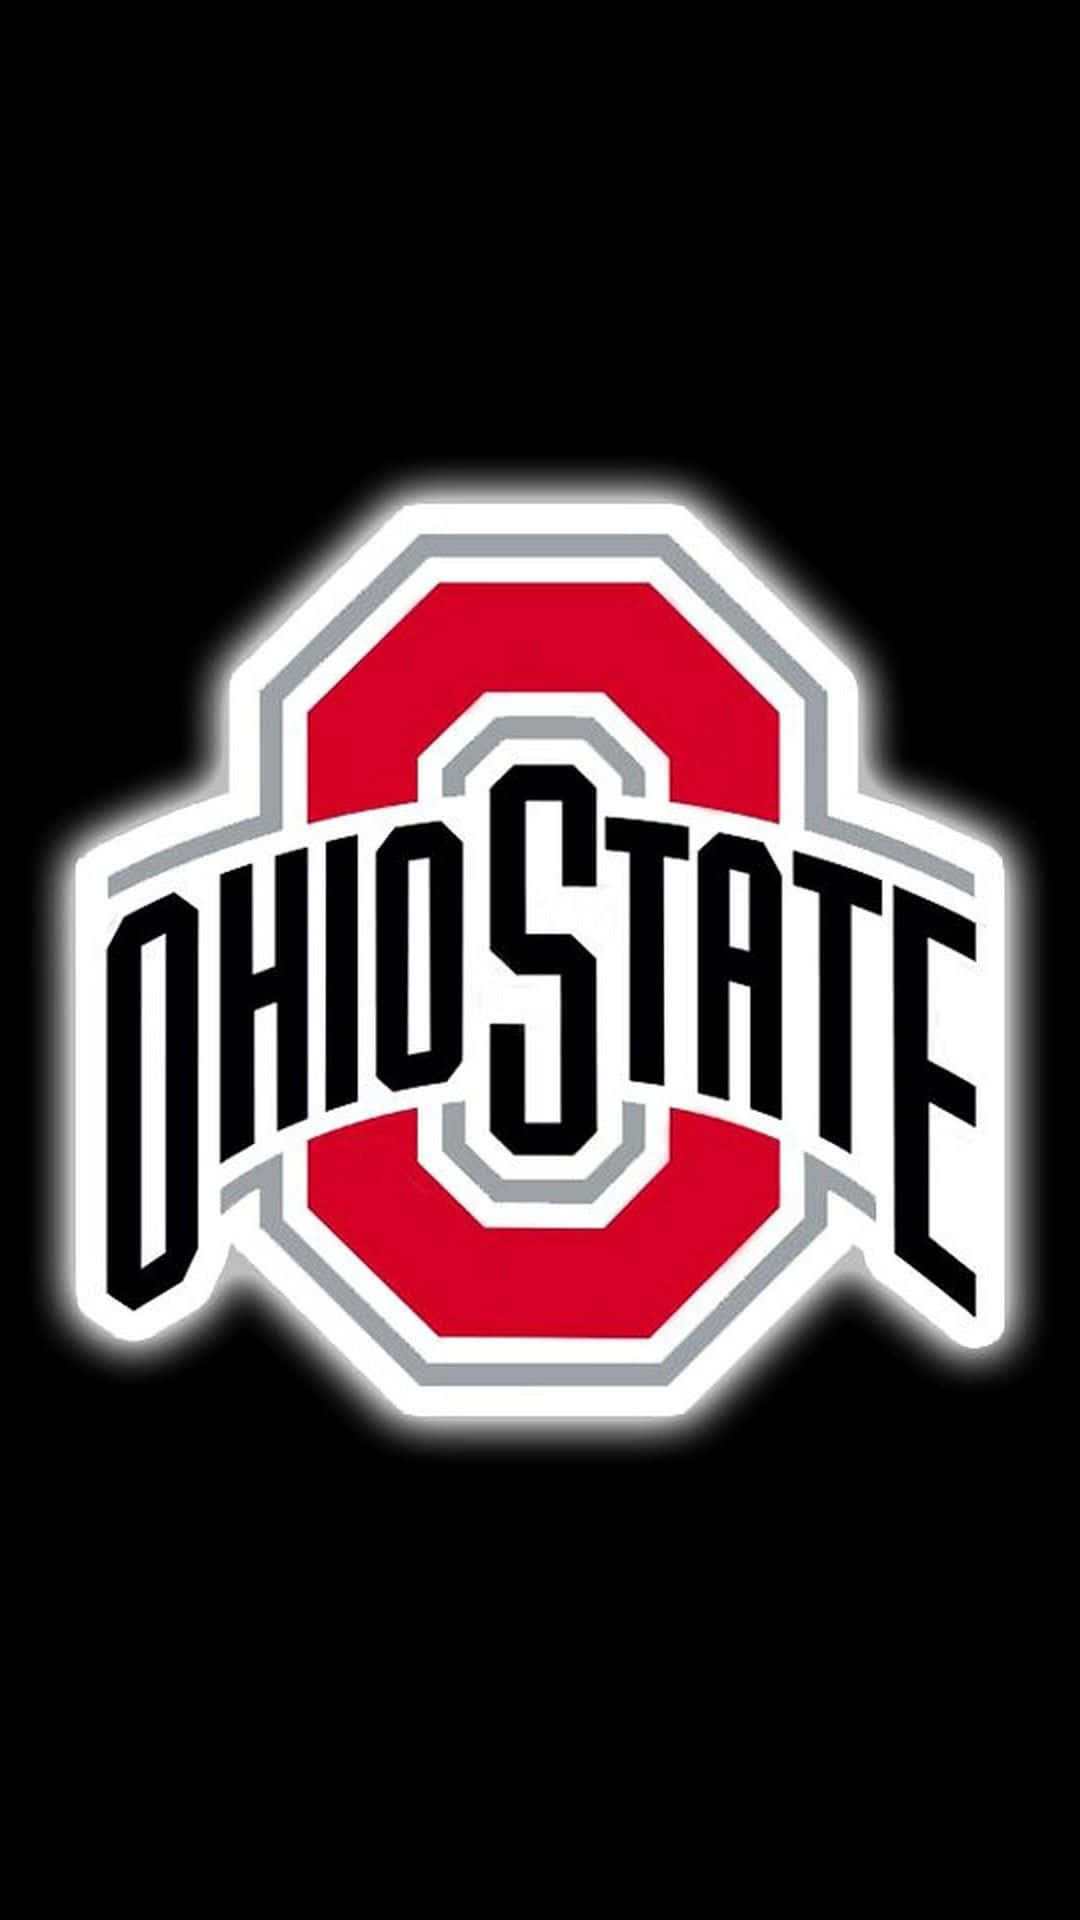 !Vis stolt dit Buckeye-stolthed med Ohio State Iphone tapet! Wallpaper